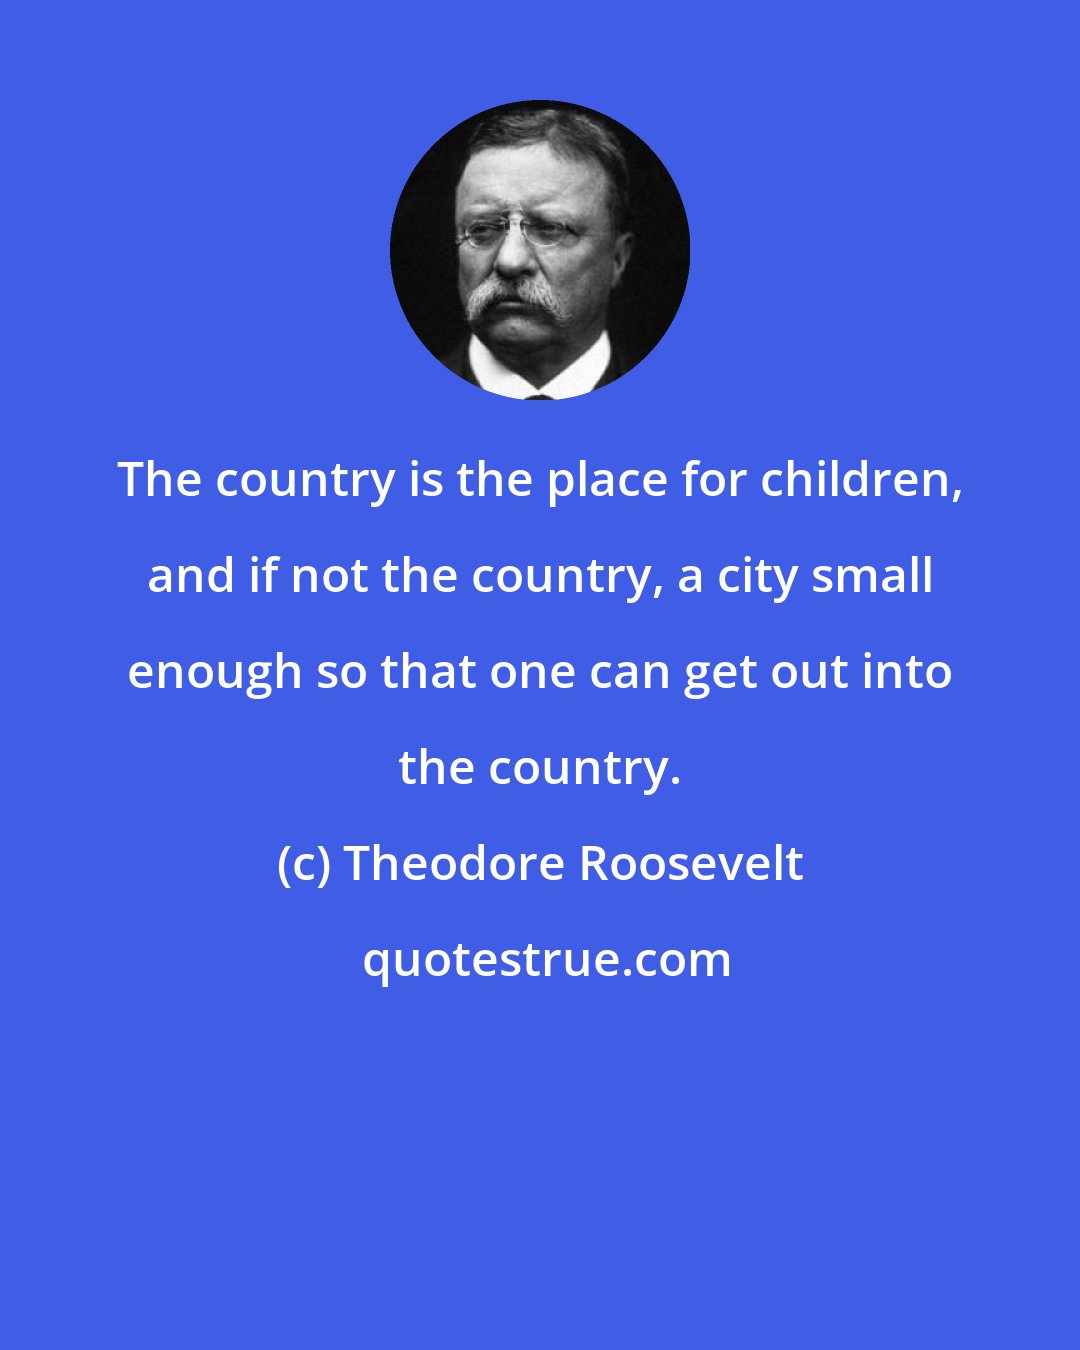 Theodore Roosevelt: The country is the place for children, and if not the country, a city small enough so that one can get out into the country.